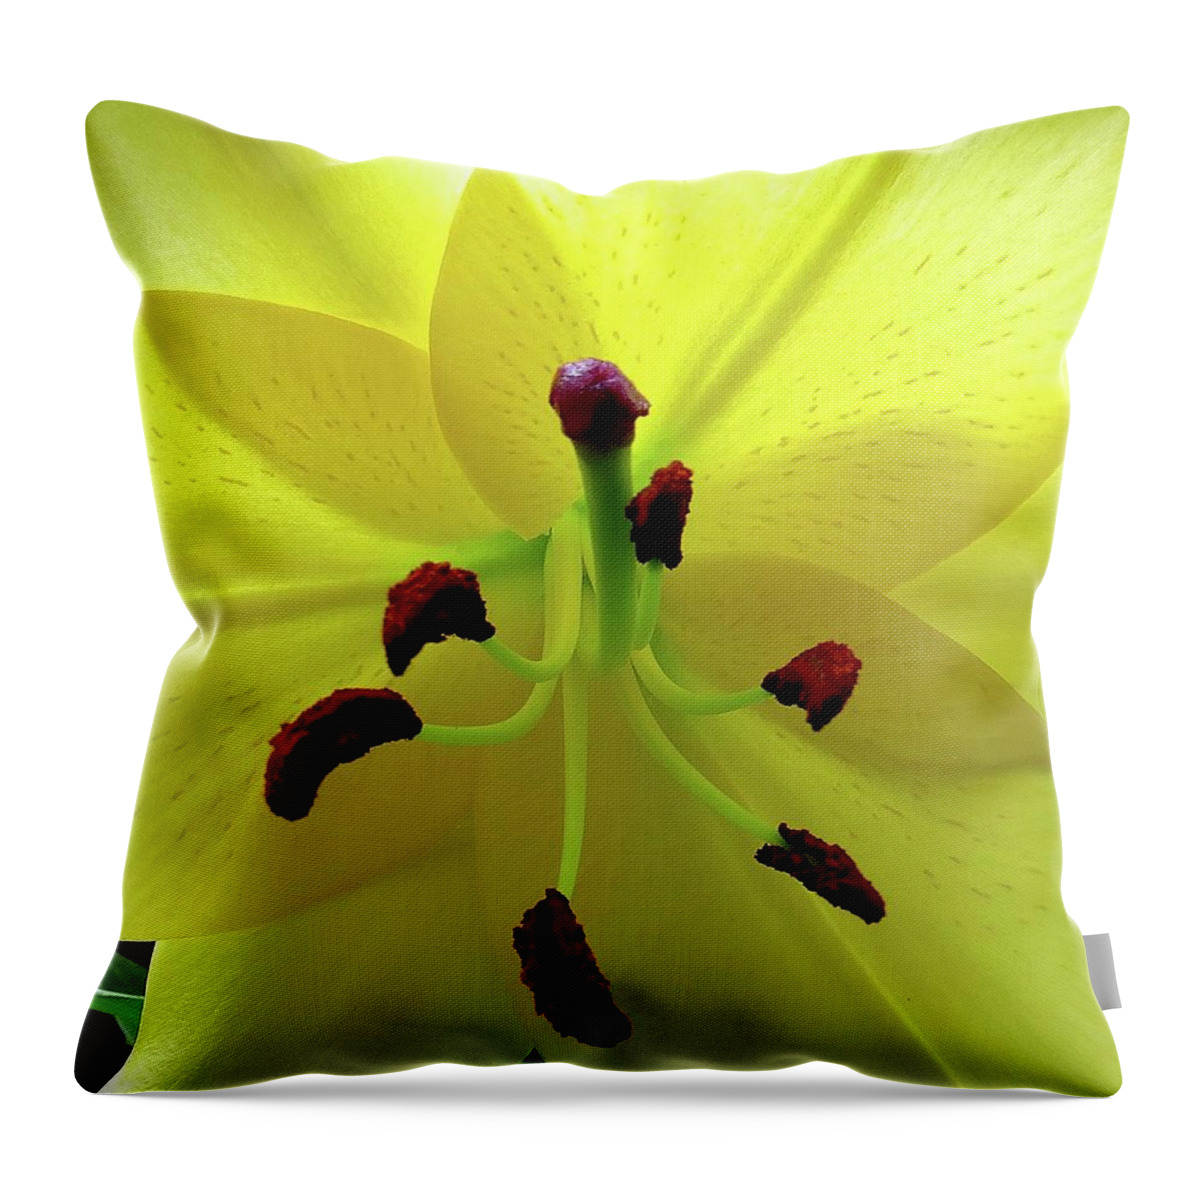 Flower Throw Pillow featuring the photograph Glowing Lily by Linda Stern